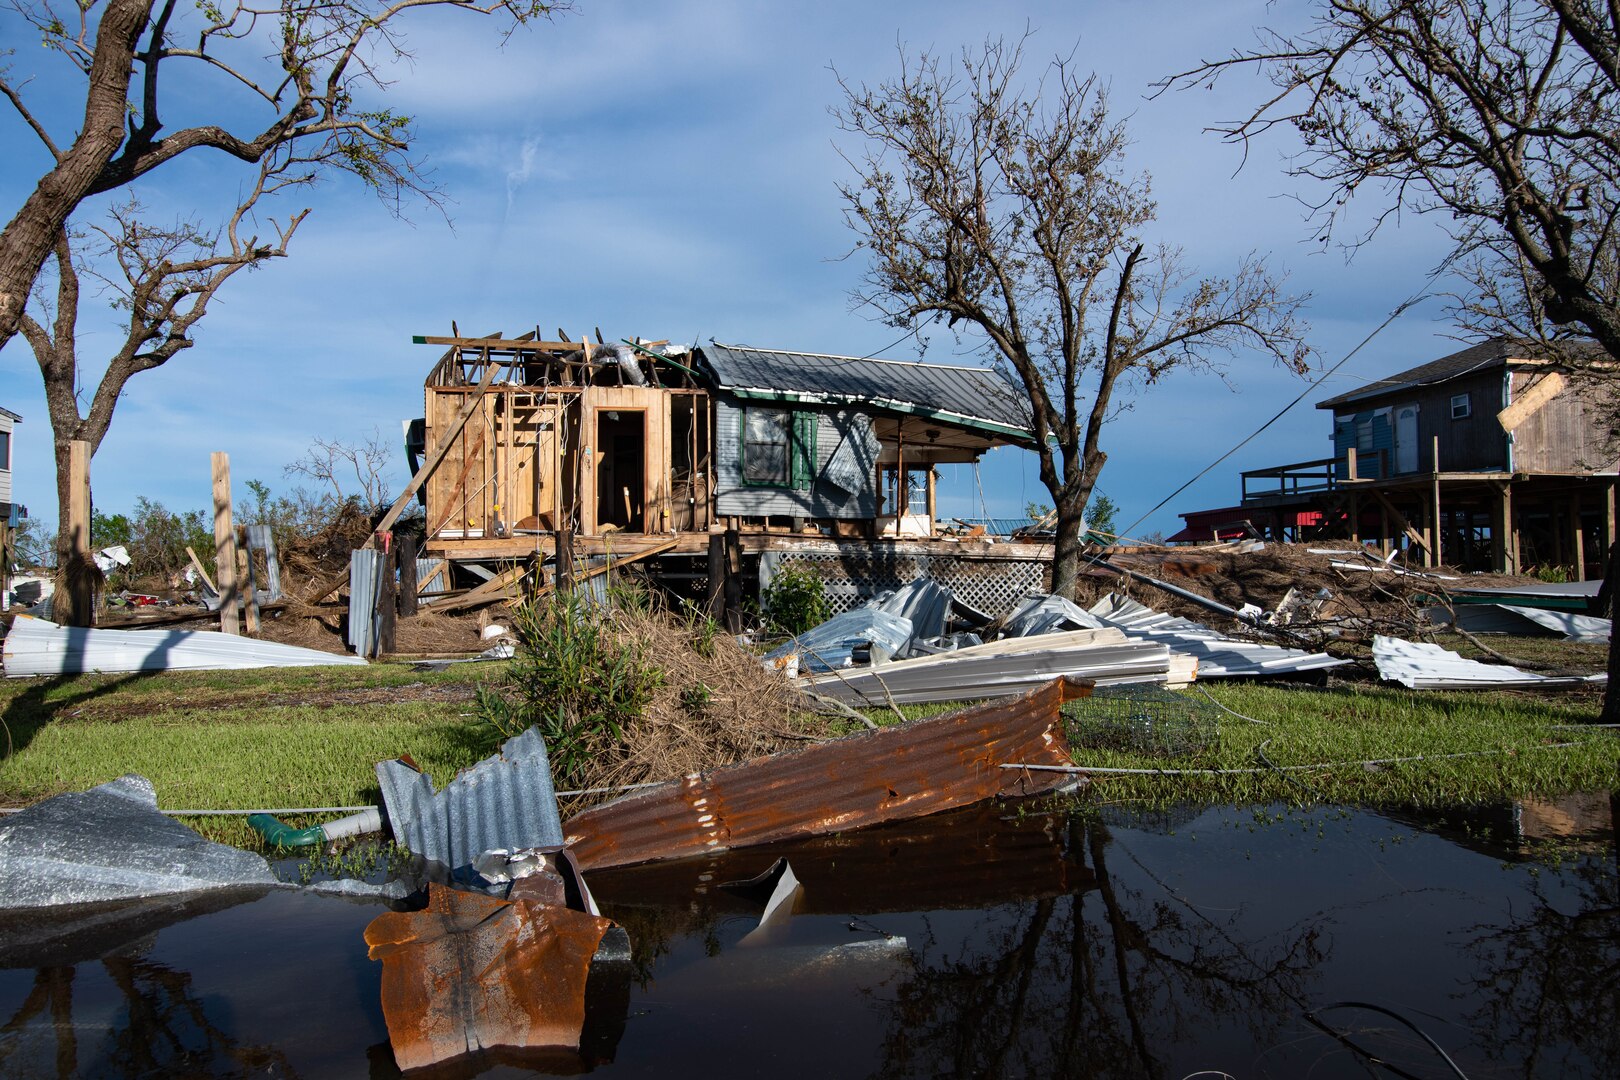 A home severely damaged after a hurricane.